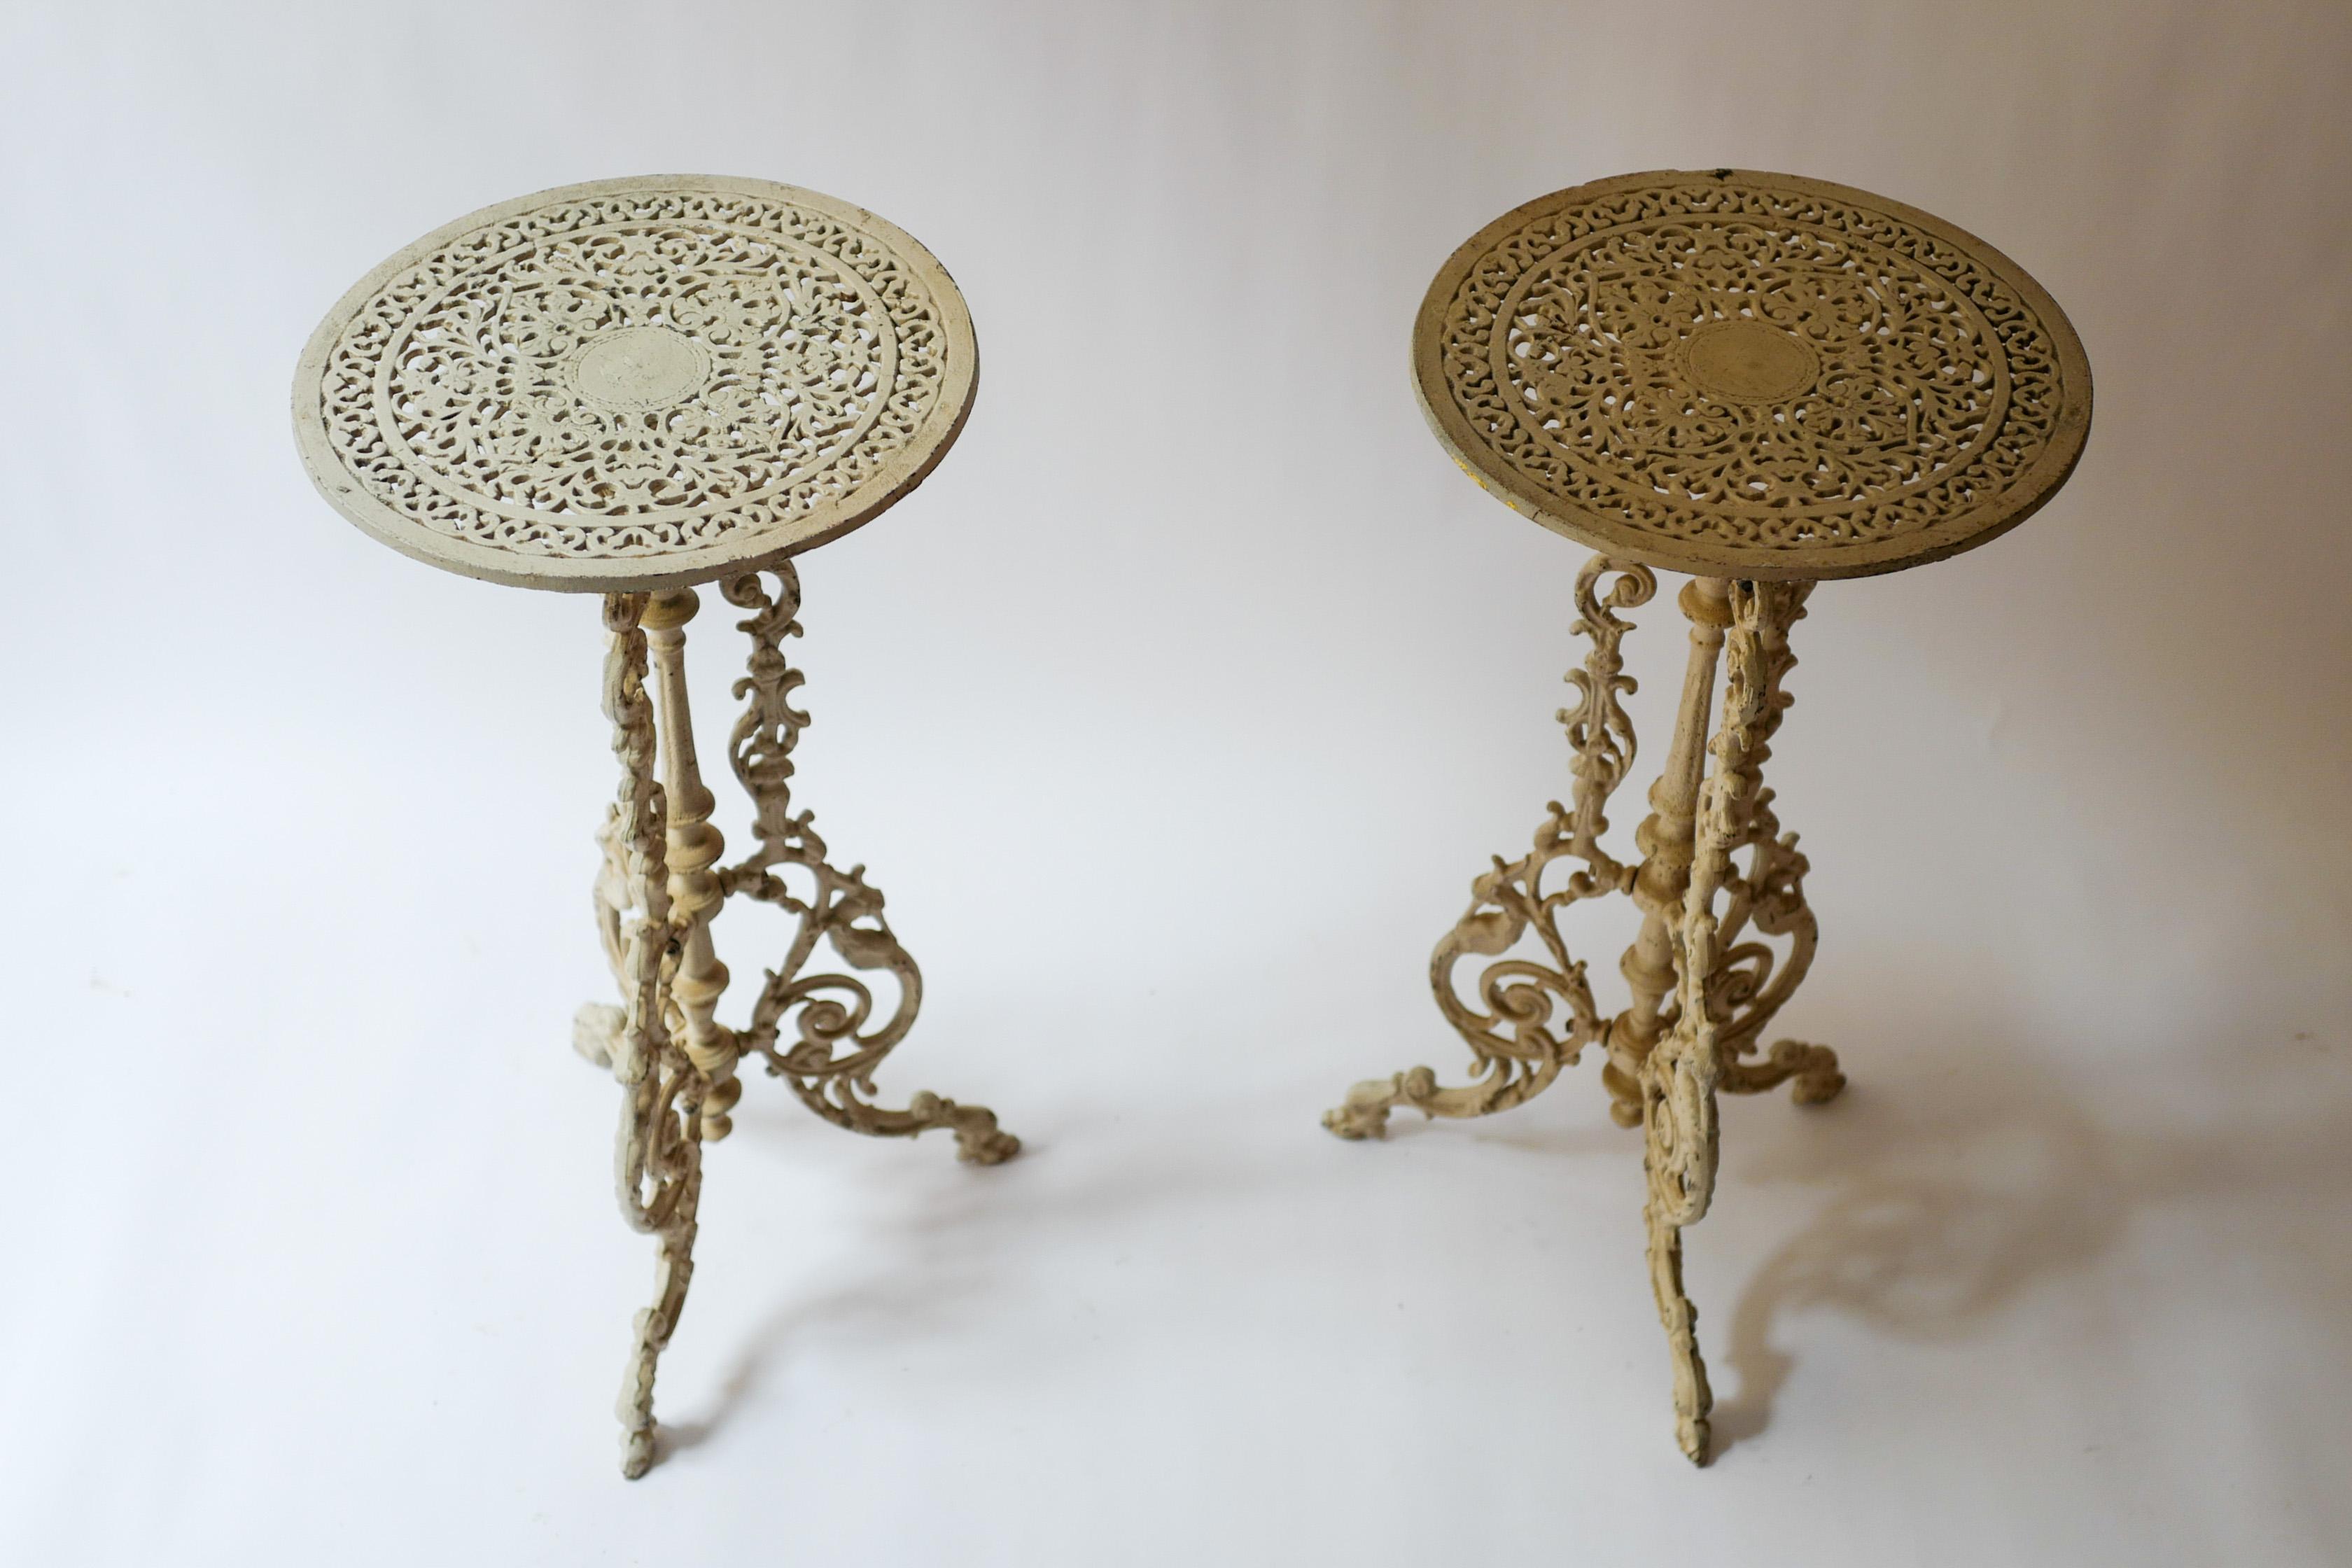 Pair of decorative iron garden pedestals from Mallorca. Top screws on and off making it easy to transport.